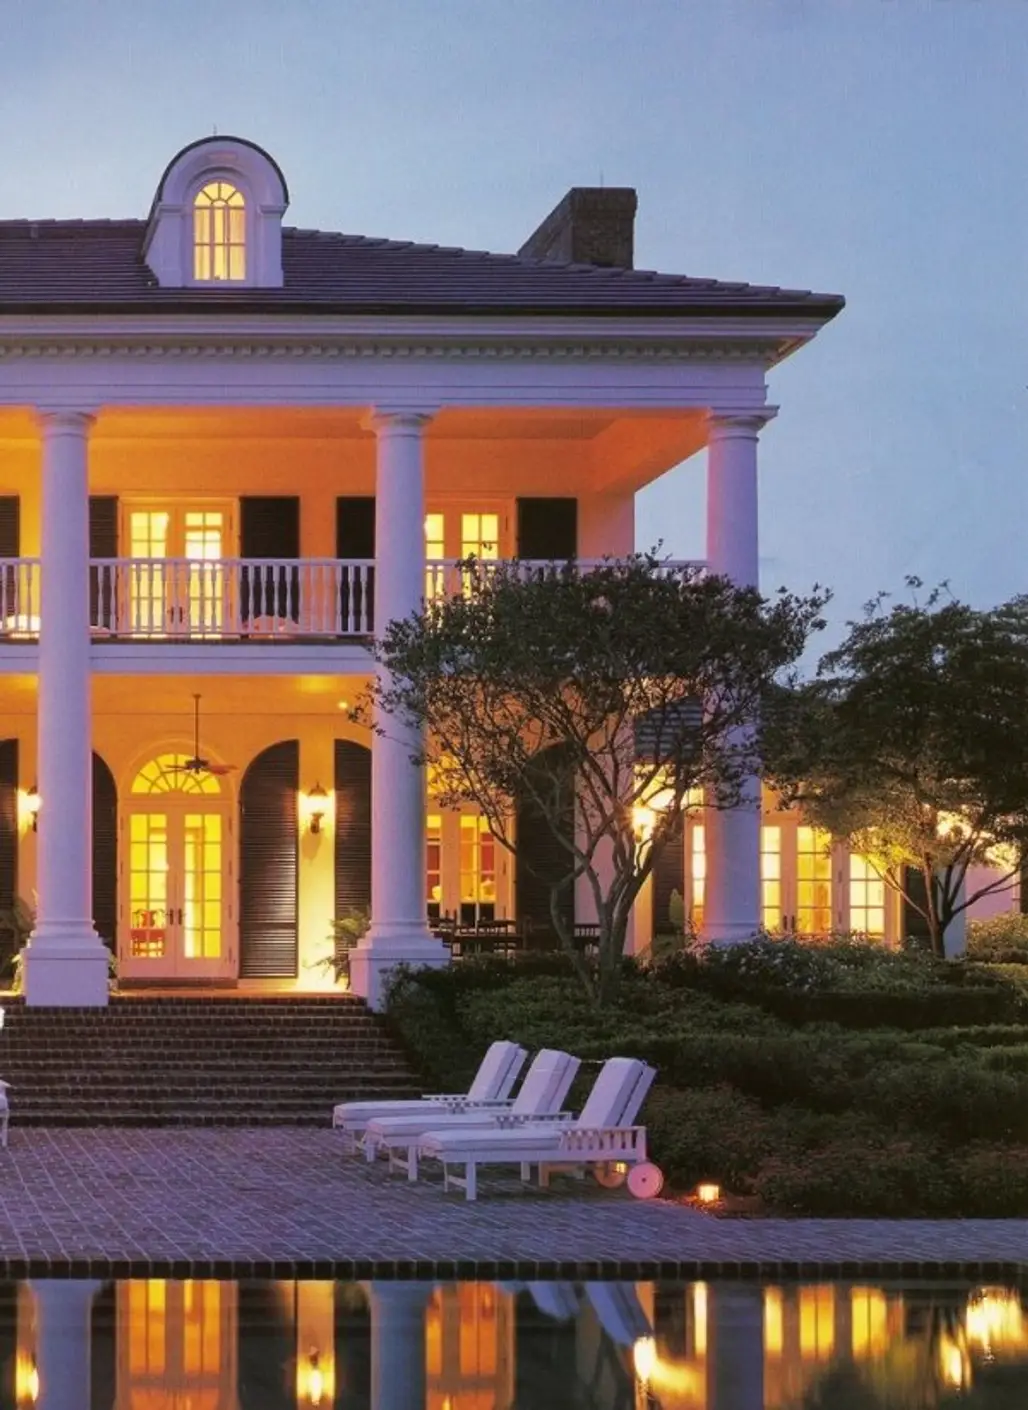 Black Shutters, Big Front Porch and Columns